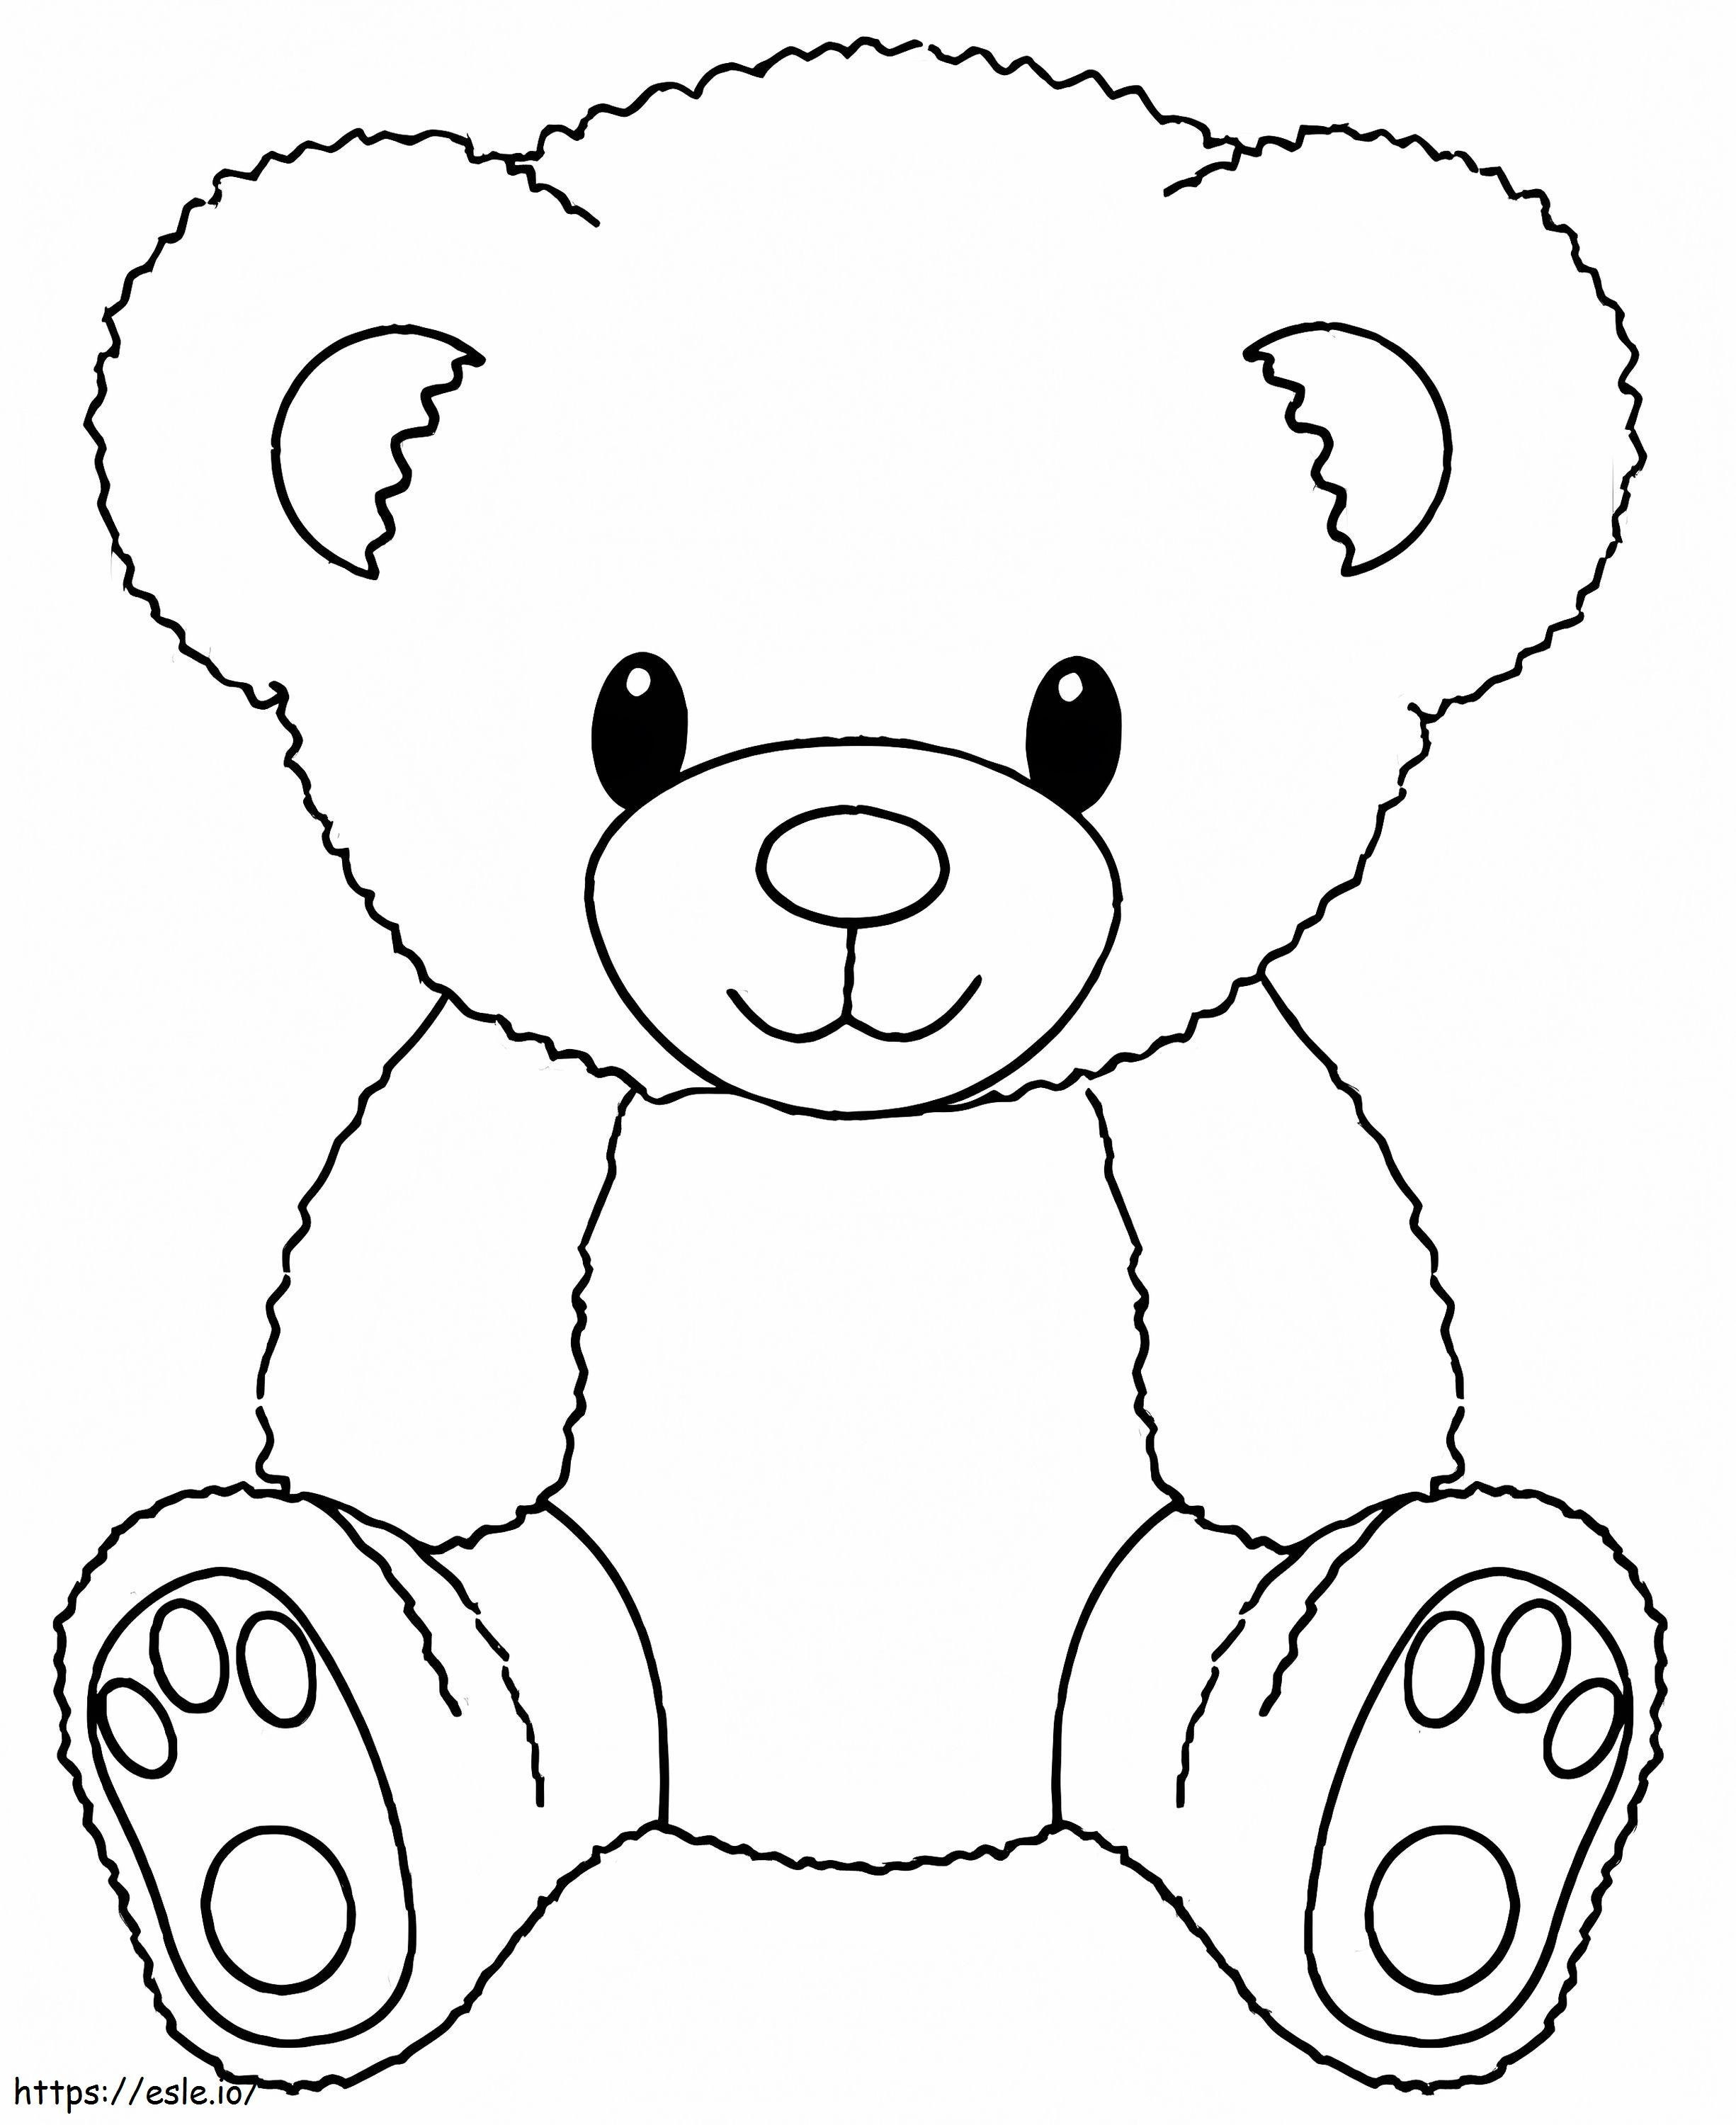 Basic Teddy Bear Sitting coloring page